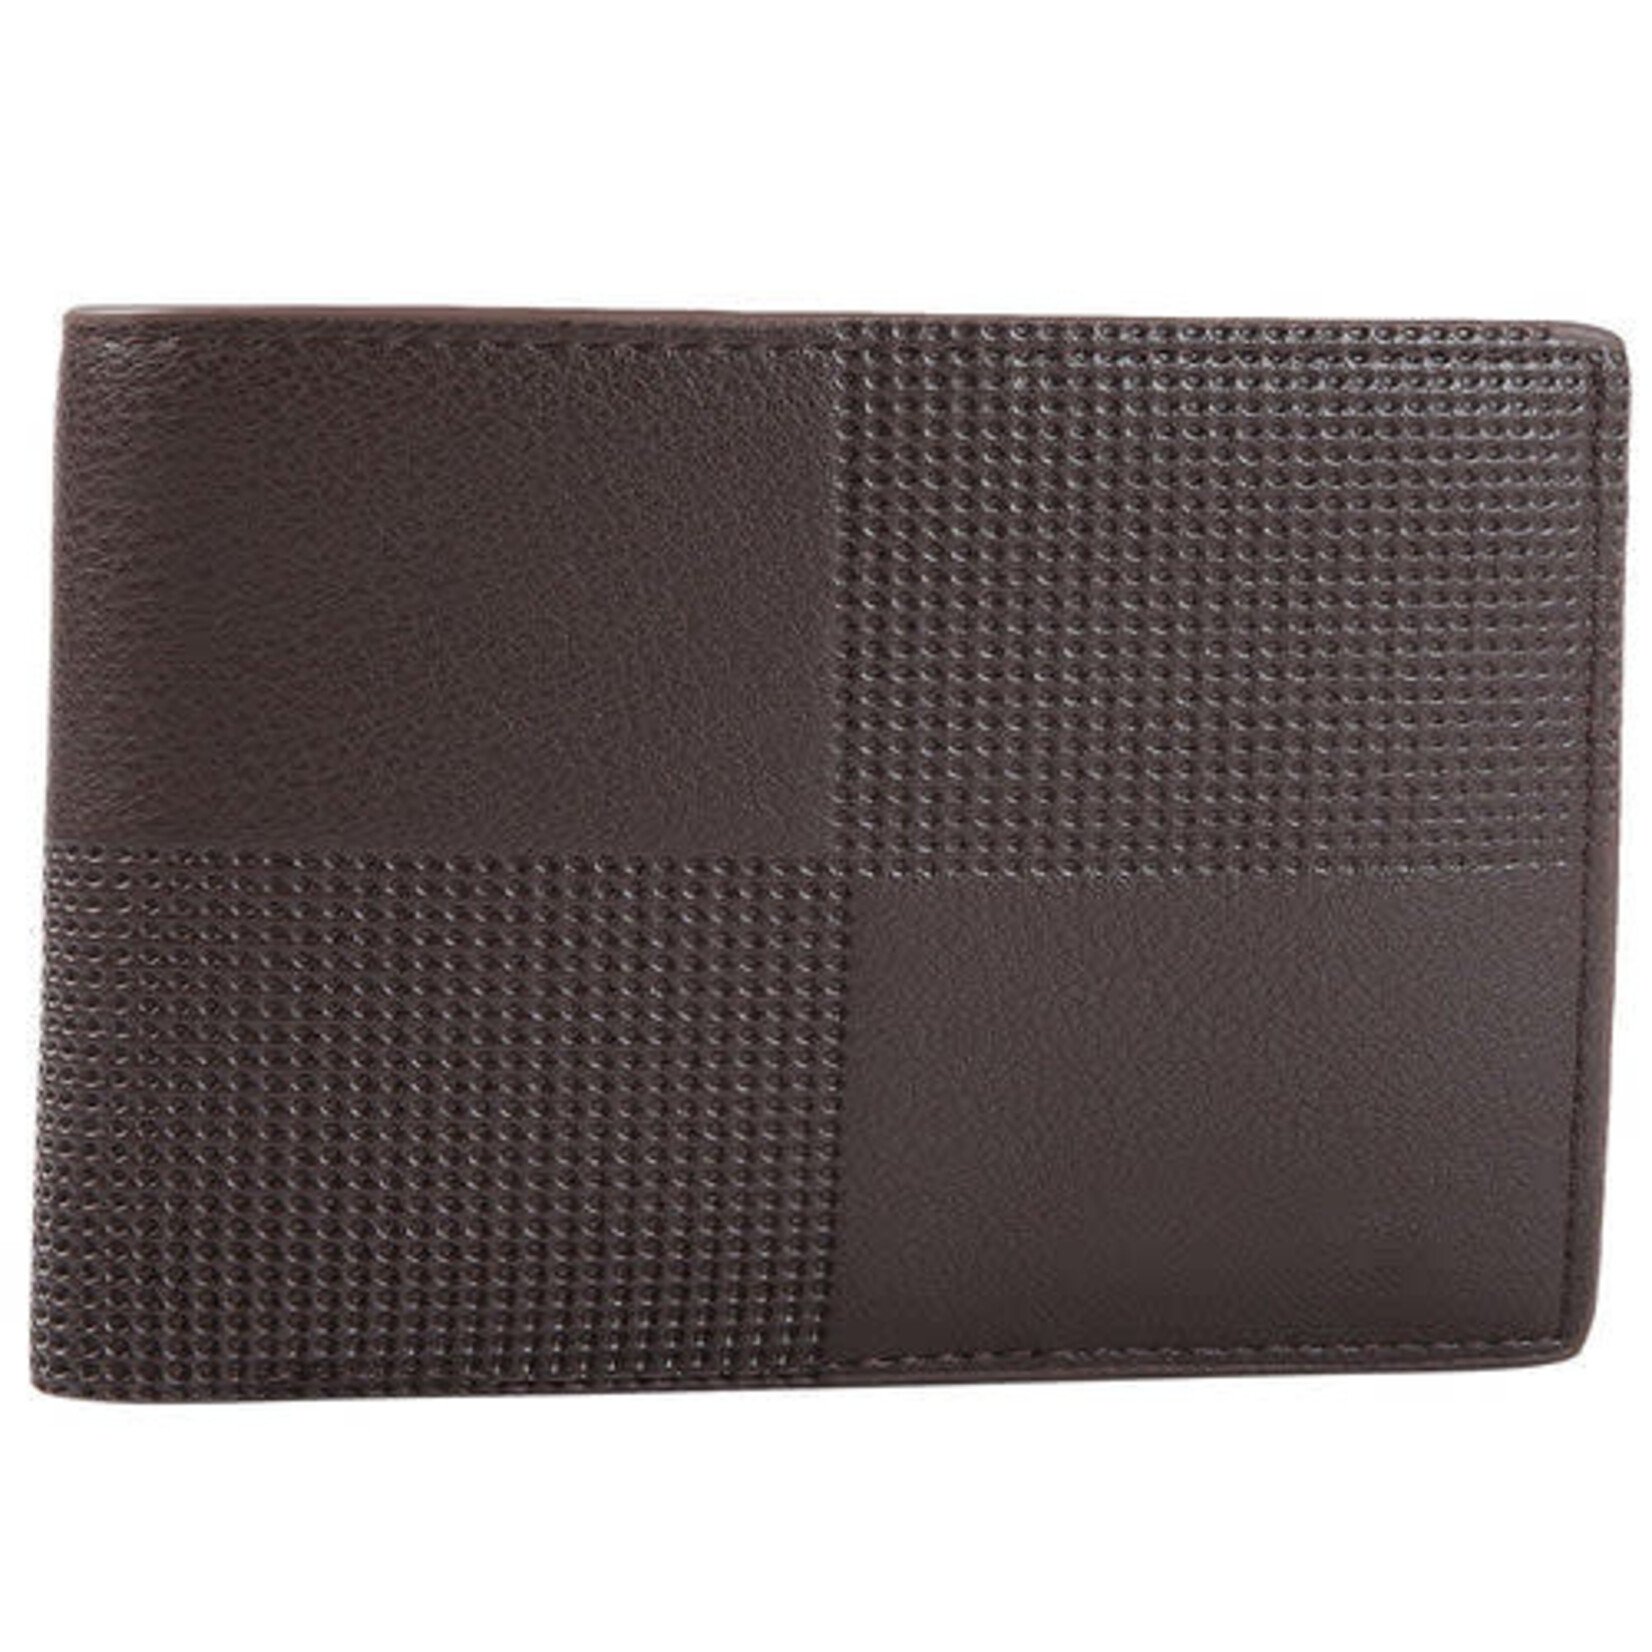 Mad Man Airmail Wallet brown